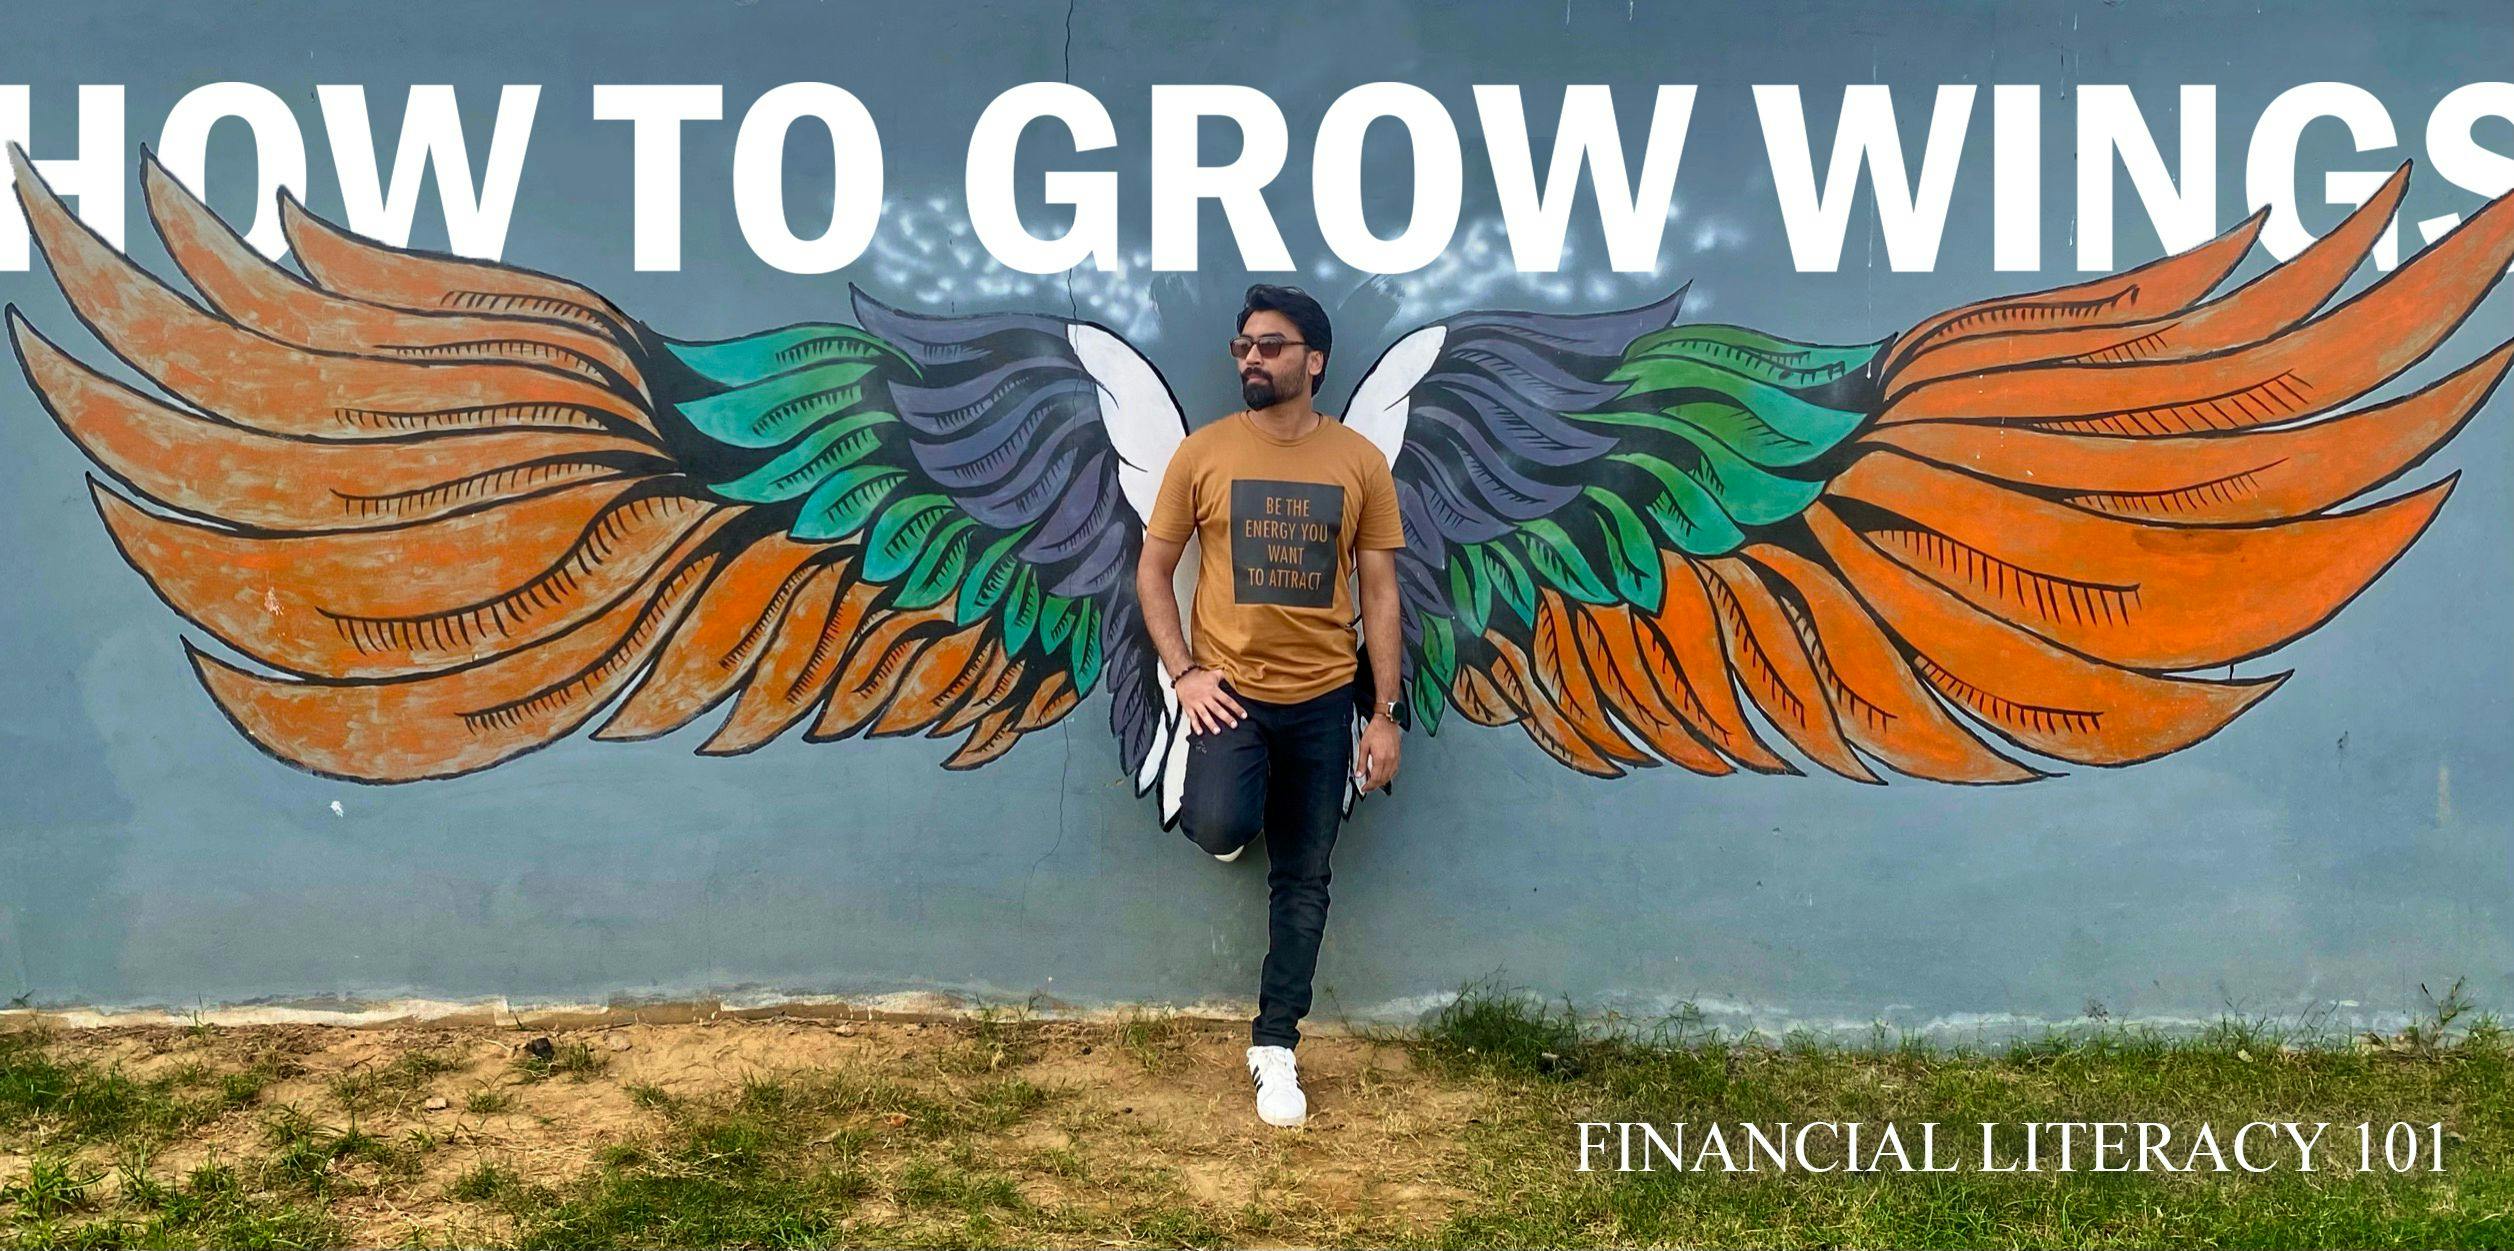 featured image - Financial Literacy 101: How to grow wings series